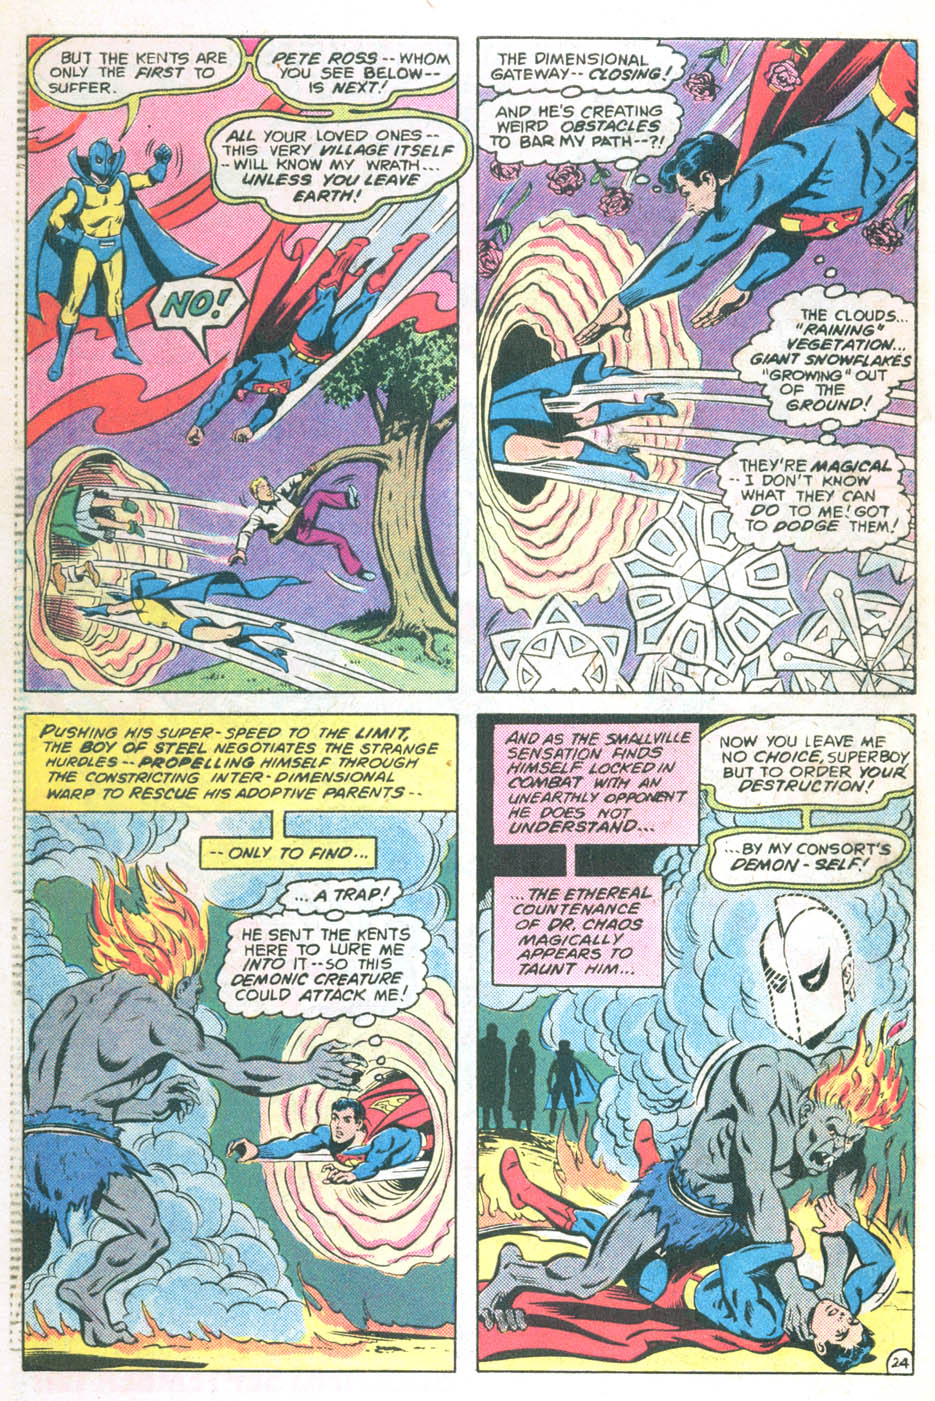 The New Adventures of Superboy 25 Page 24